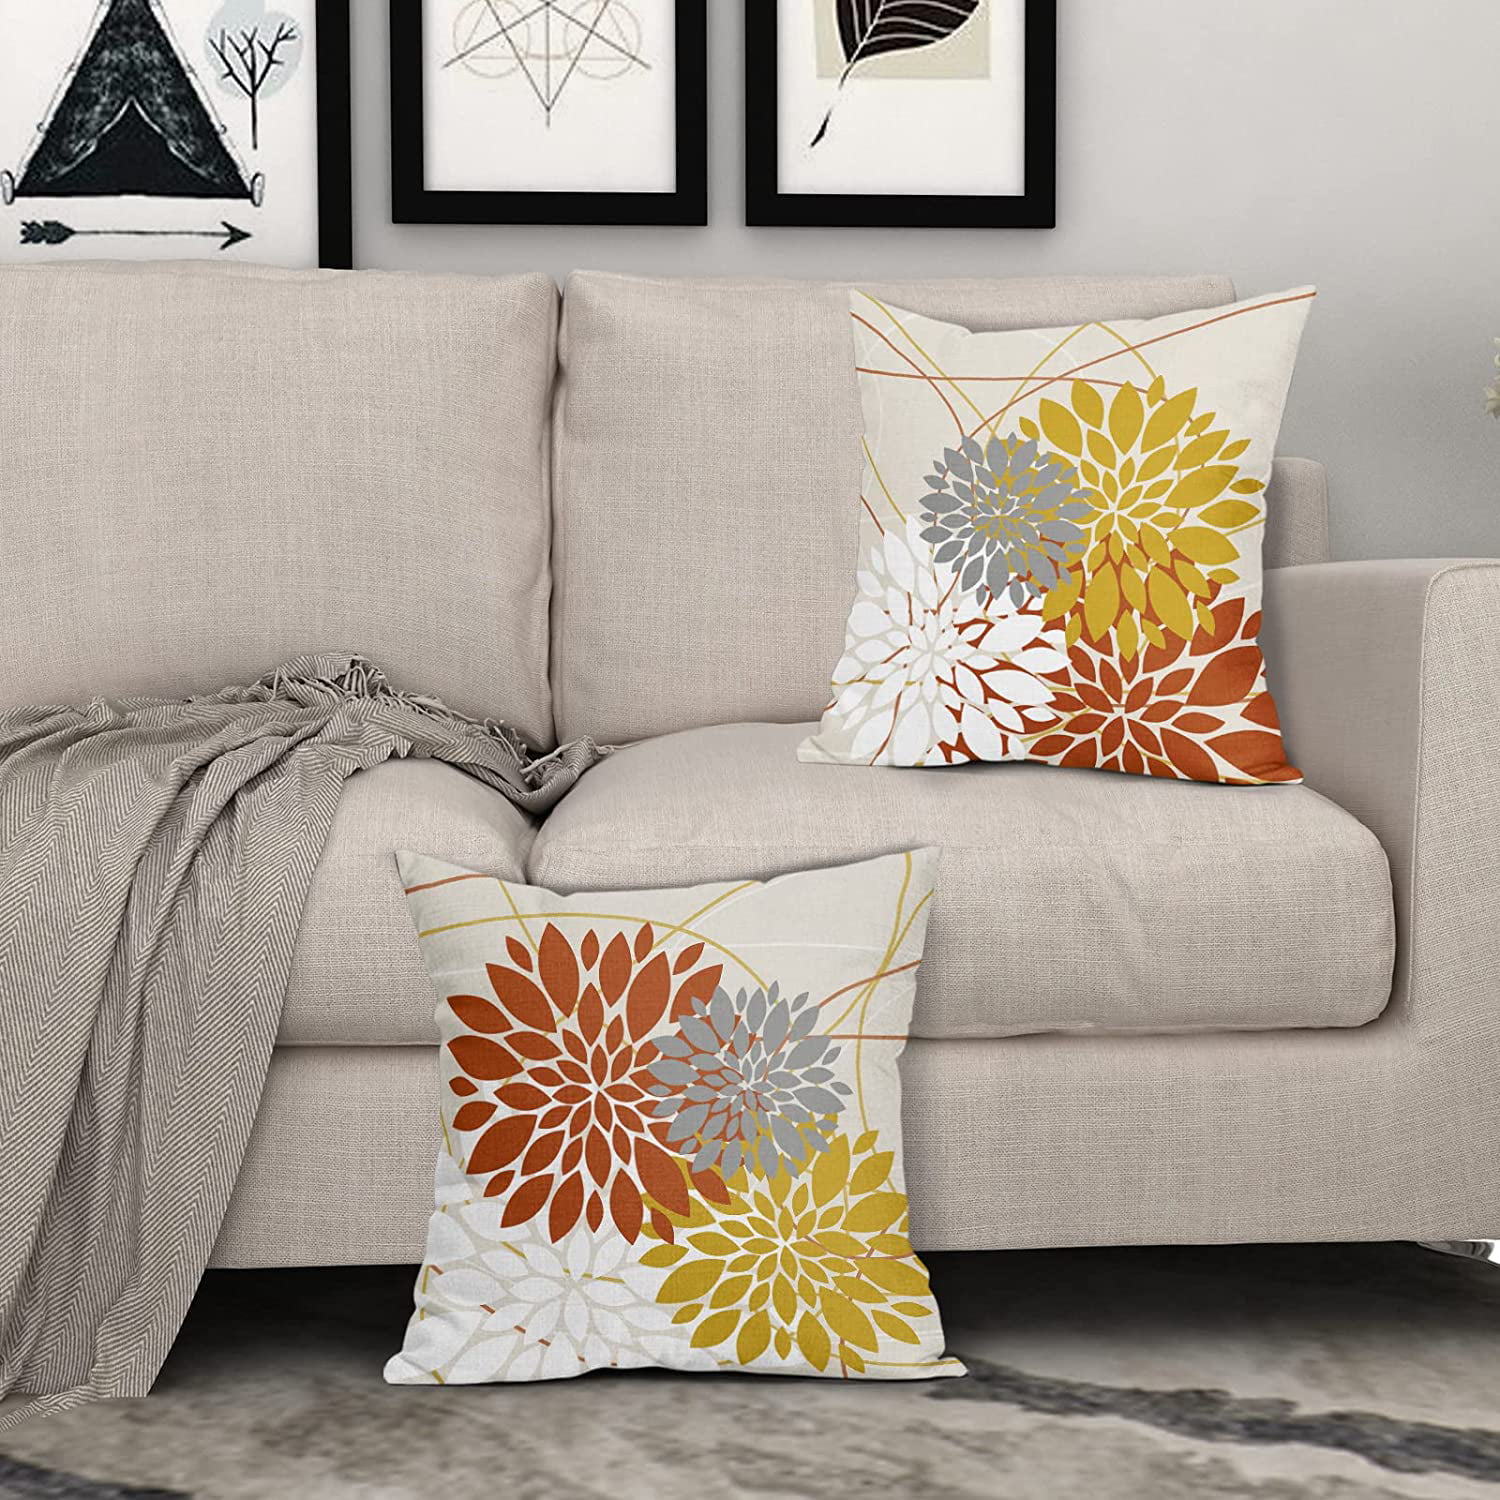 Autumn Colored Throw Pillow Covers on White Couch - Soul & Lane